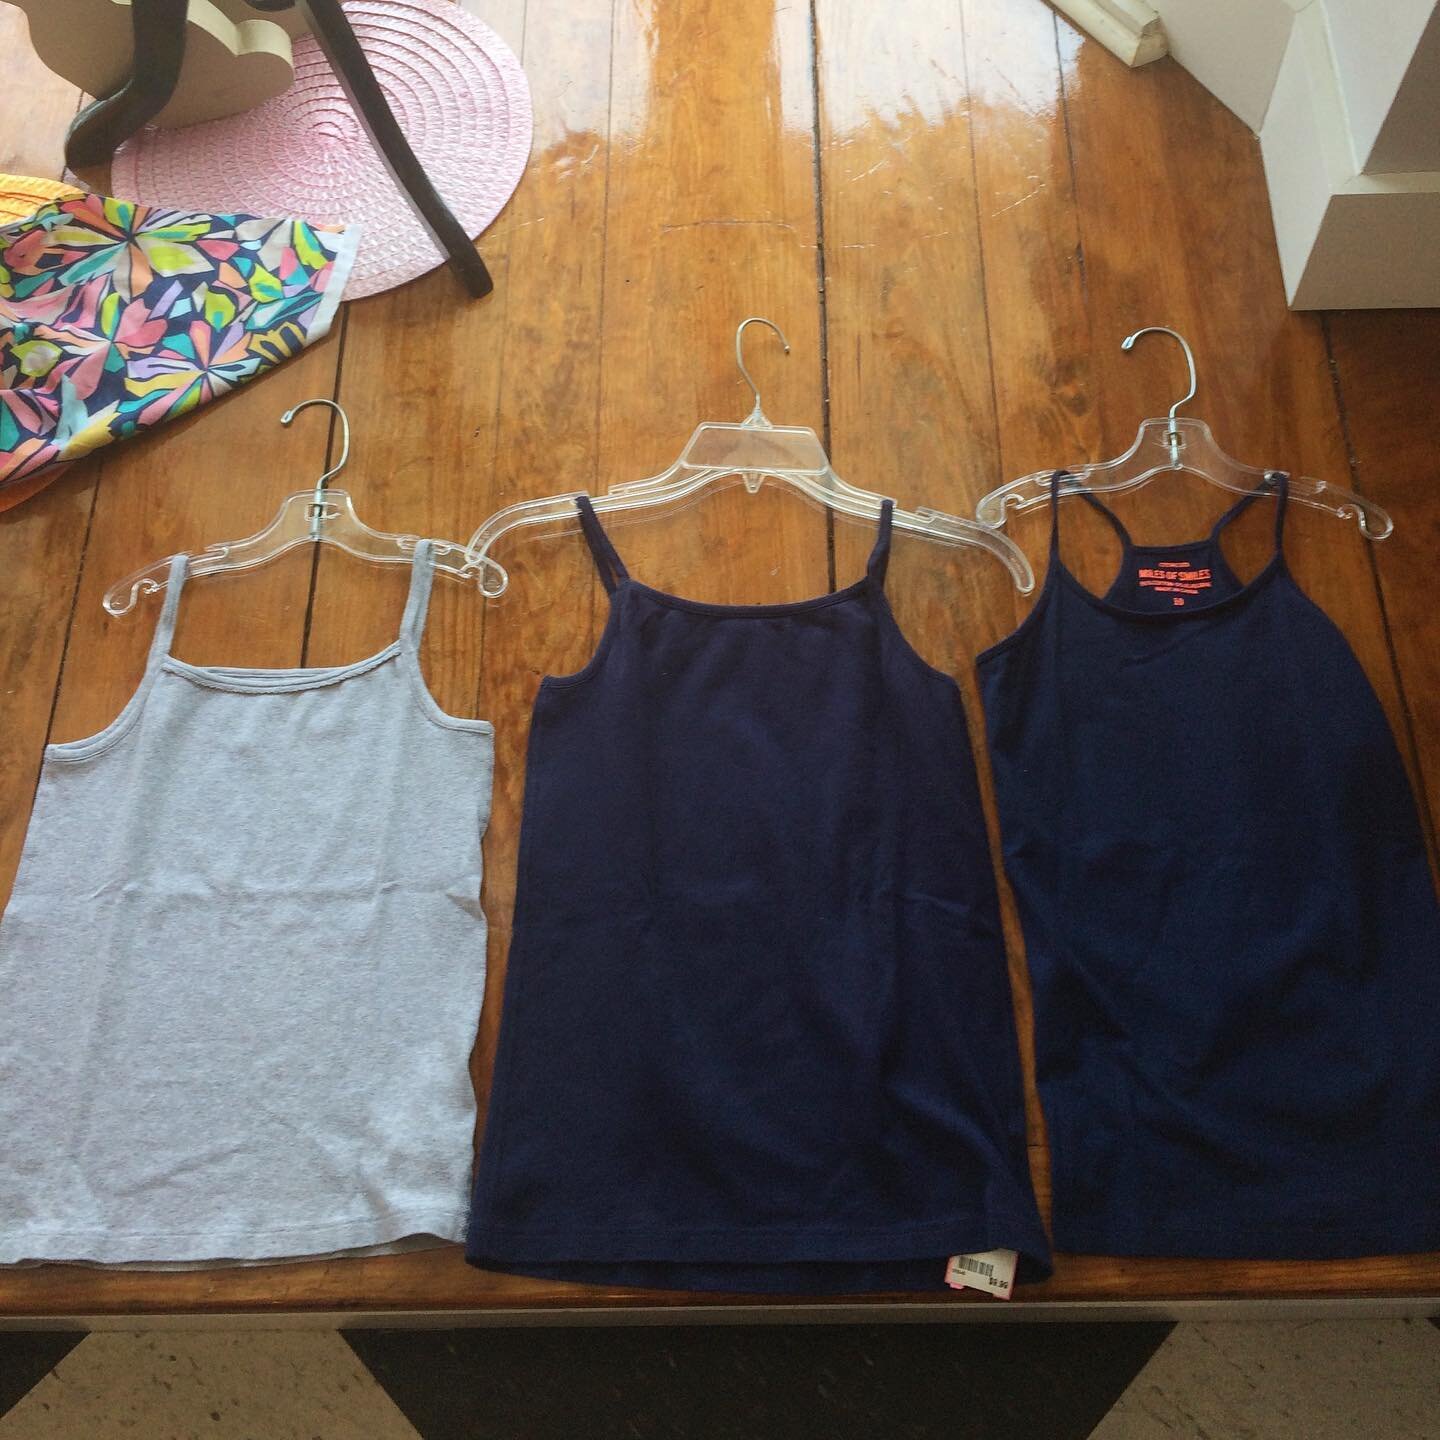 Comfy camis in! Grey #hannaandersson cami size 10/12 &amp; $9.99. Navy cami in the middle #hannaandersson  size 14 &amp; $9.99. Navy cami on right size #crewcuts size 10 &amp; $8.99.  #529hh #529hhfaves #529hollinhall #kidsconsignment #consignment #b